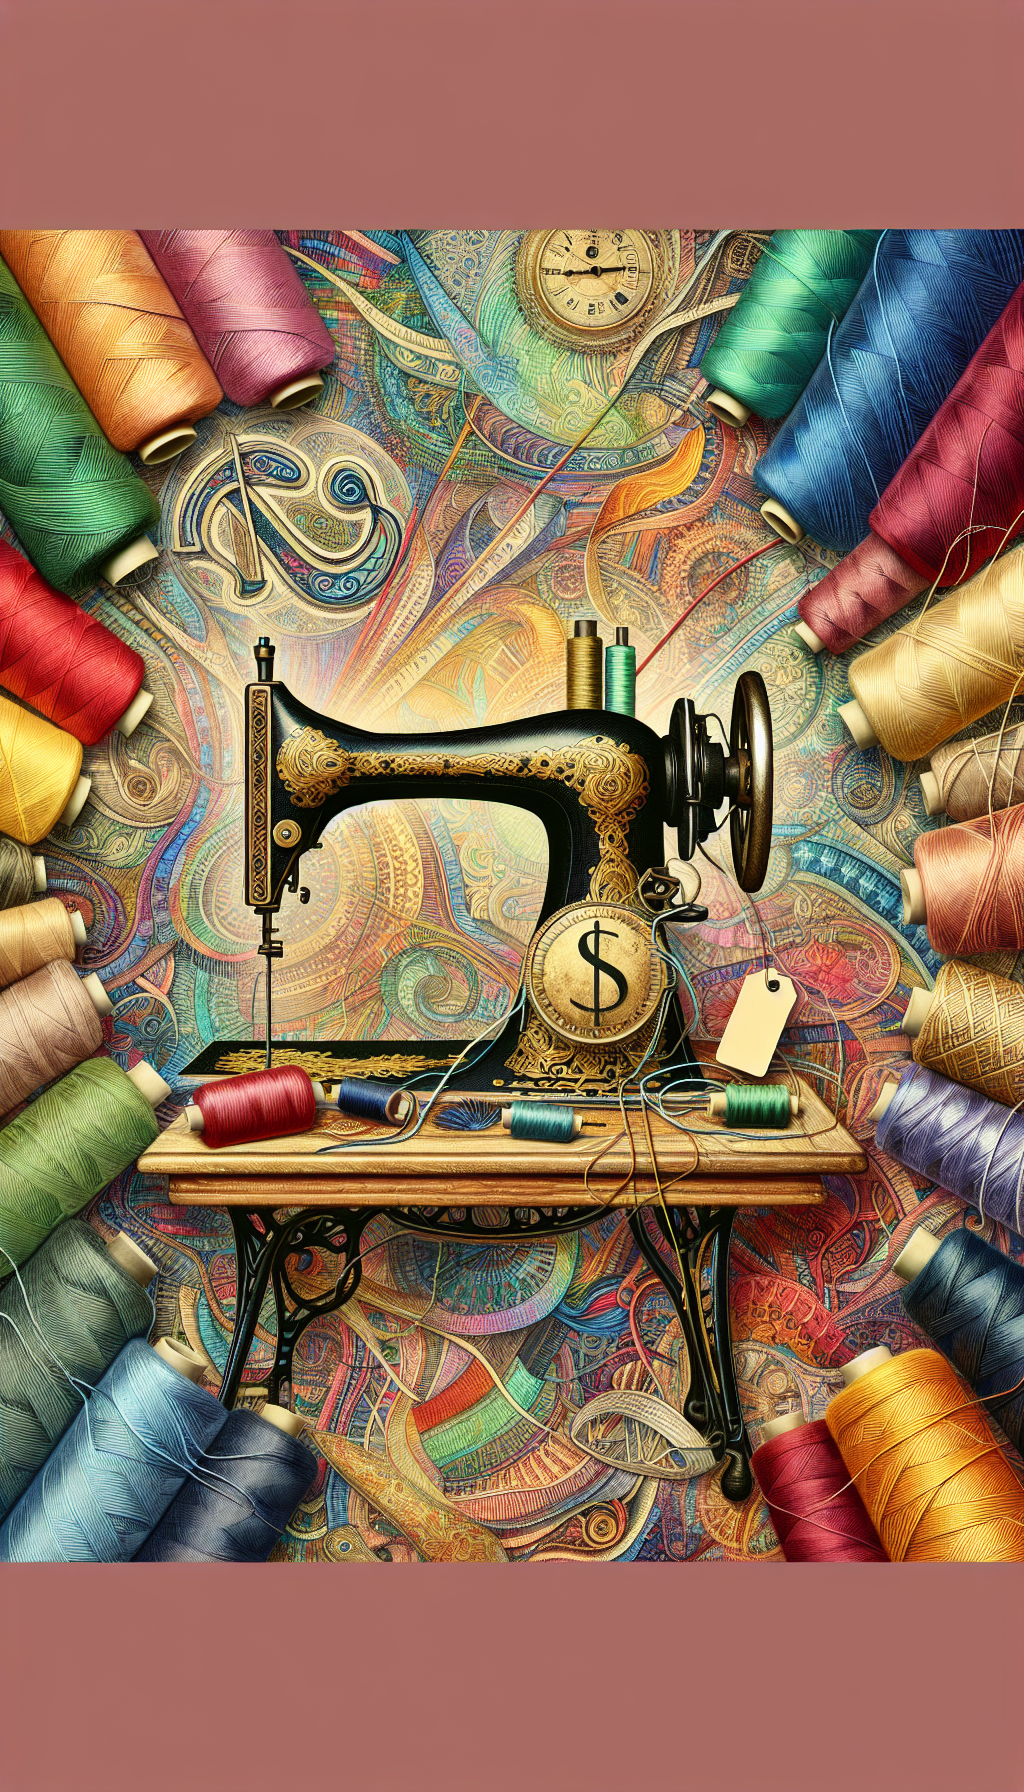 An eclectic tapestry backdrop featuring vibrant threads interweaving key symbols - a dollar sign, a timepiece, a brand logo, and a quality seal - into the fabric, converging upon an ornately detailed, vintage sewing machine that’s part-golden filigree to signify value, with a price tag dangling from its spool, showcasing a fusion of historical charm and monetary worth.